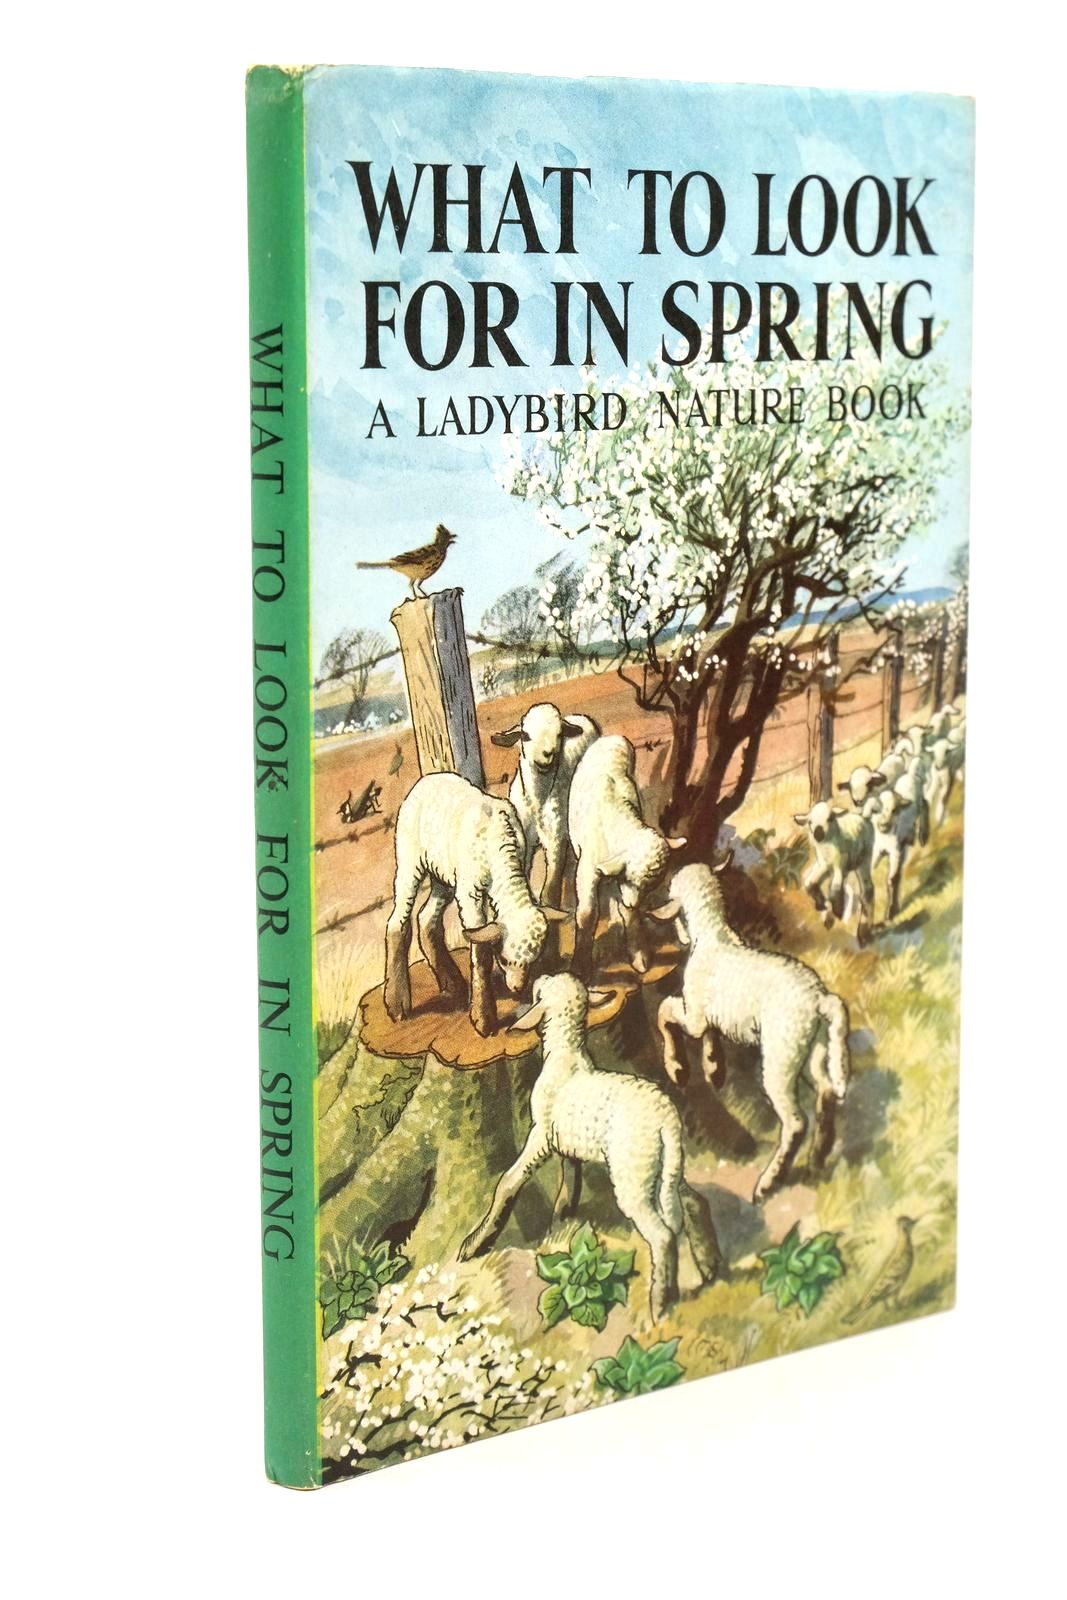 Photo of WHAT TO LOOK FOR IN SPRING written by Watson, E.L. Grant illustrated by Tunnicliffe, C.F. published by Wills &amp; Hepworth Ltd. (STOCK CODE: 1323146)  for sale by Stella & Rose's Books